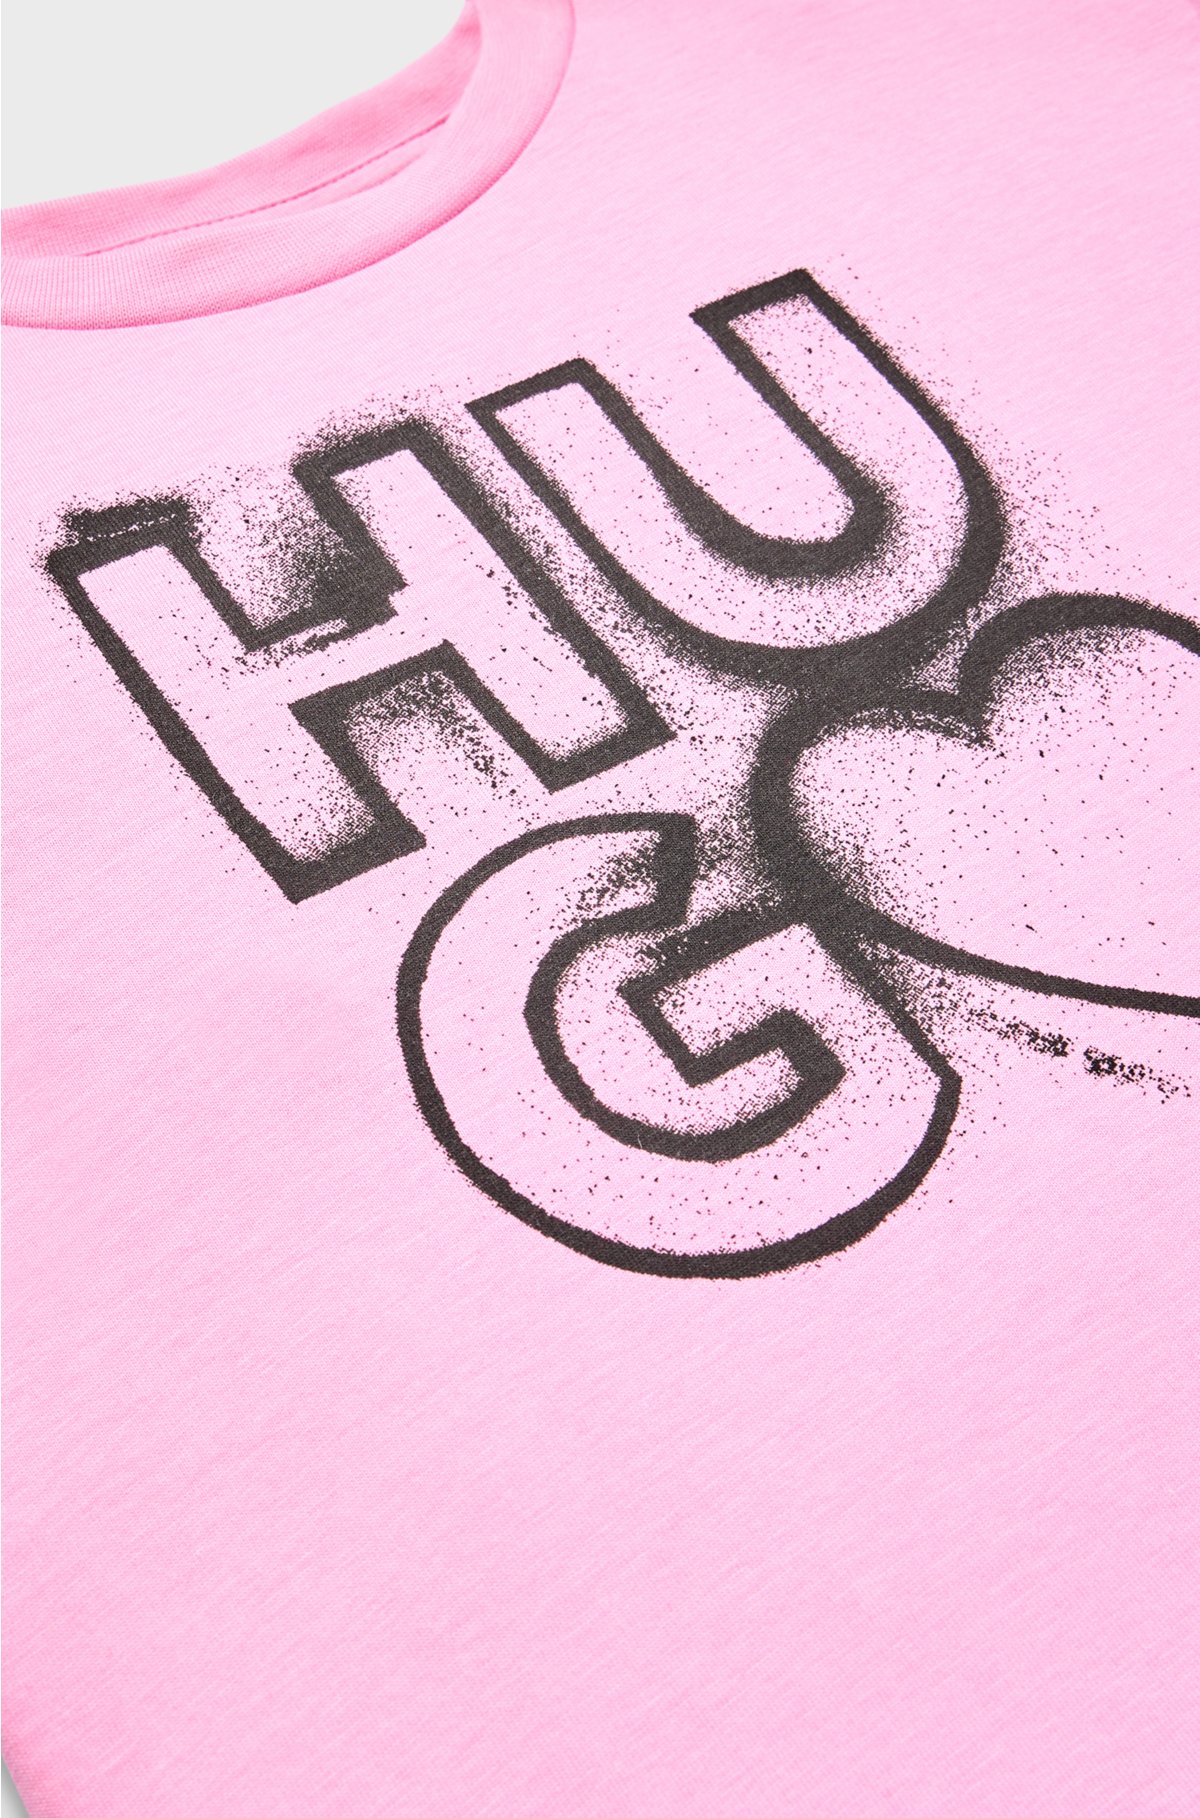 Kids' T-shirt in pure cotton with logo artwork, Pink